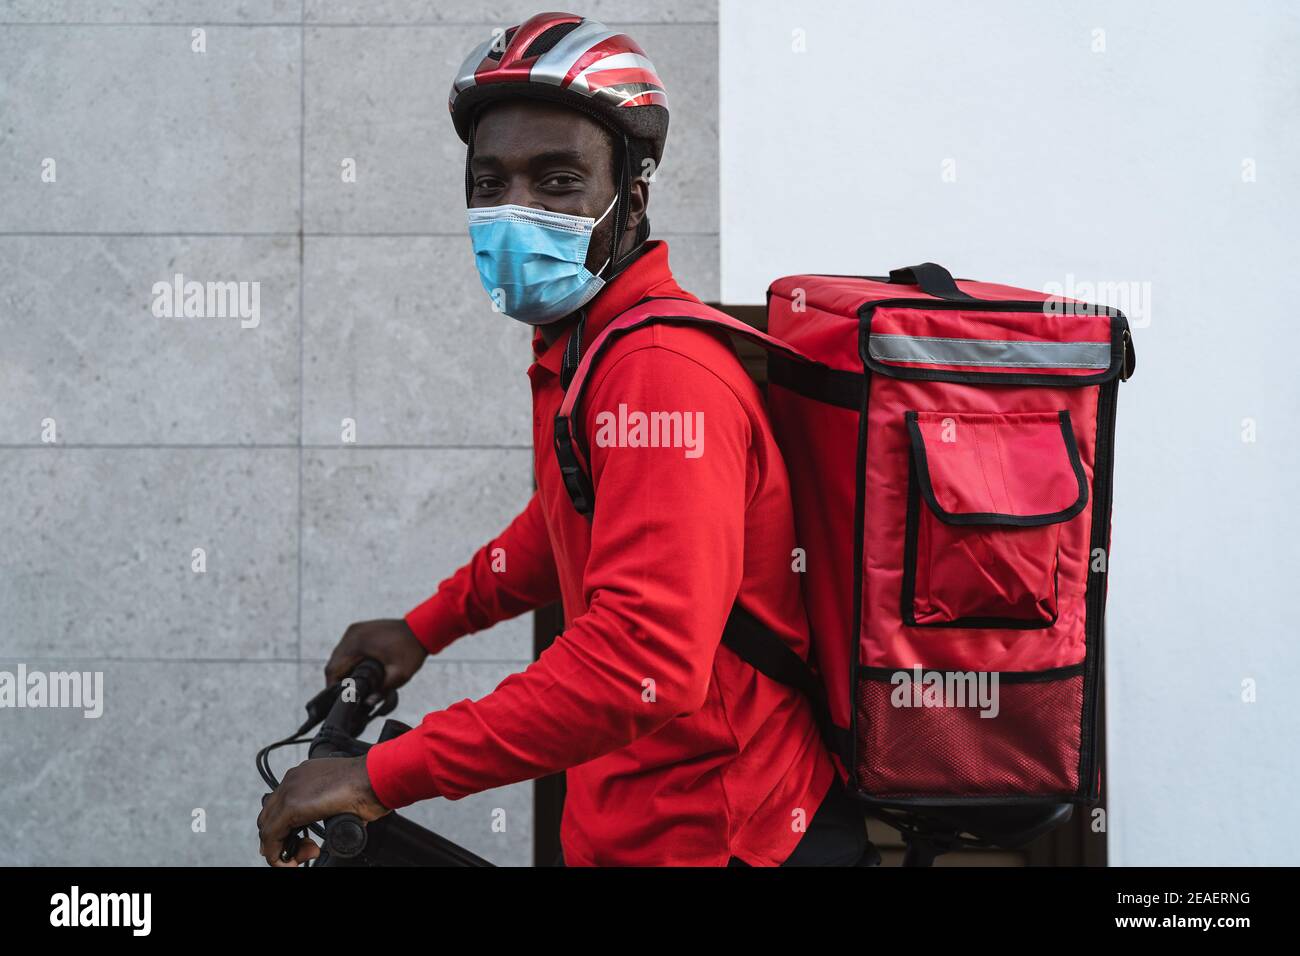 African rider man delivering meal to customers with electric bicycle while wearing face mask during corona virus outbreak Stock Photo